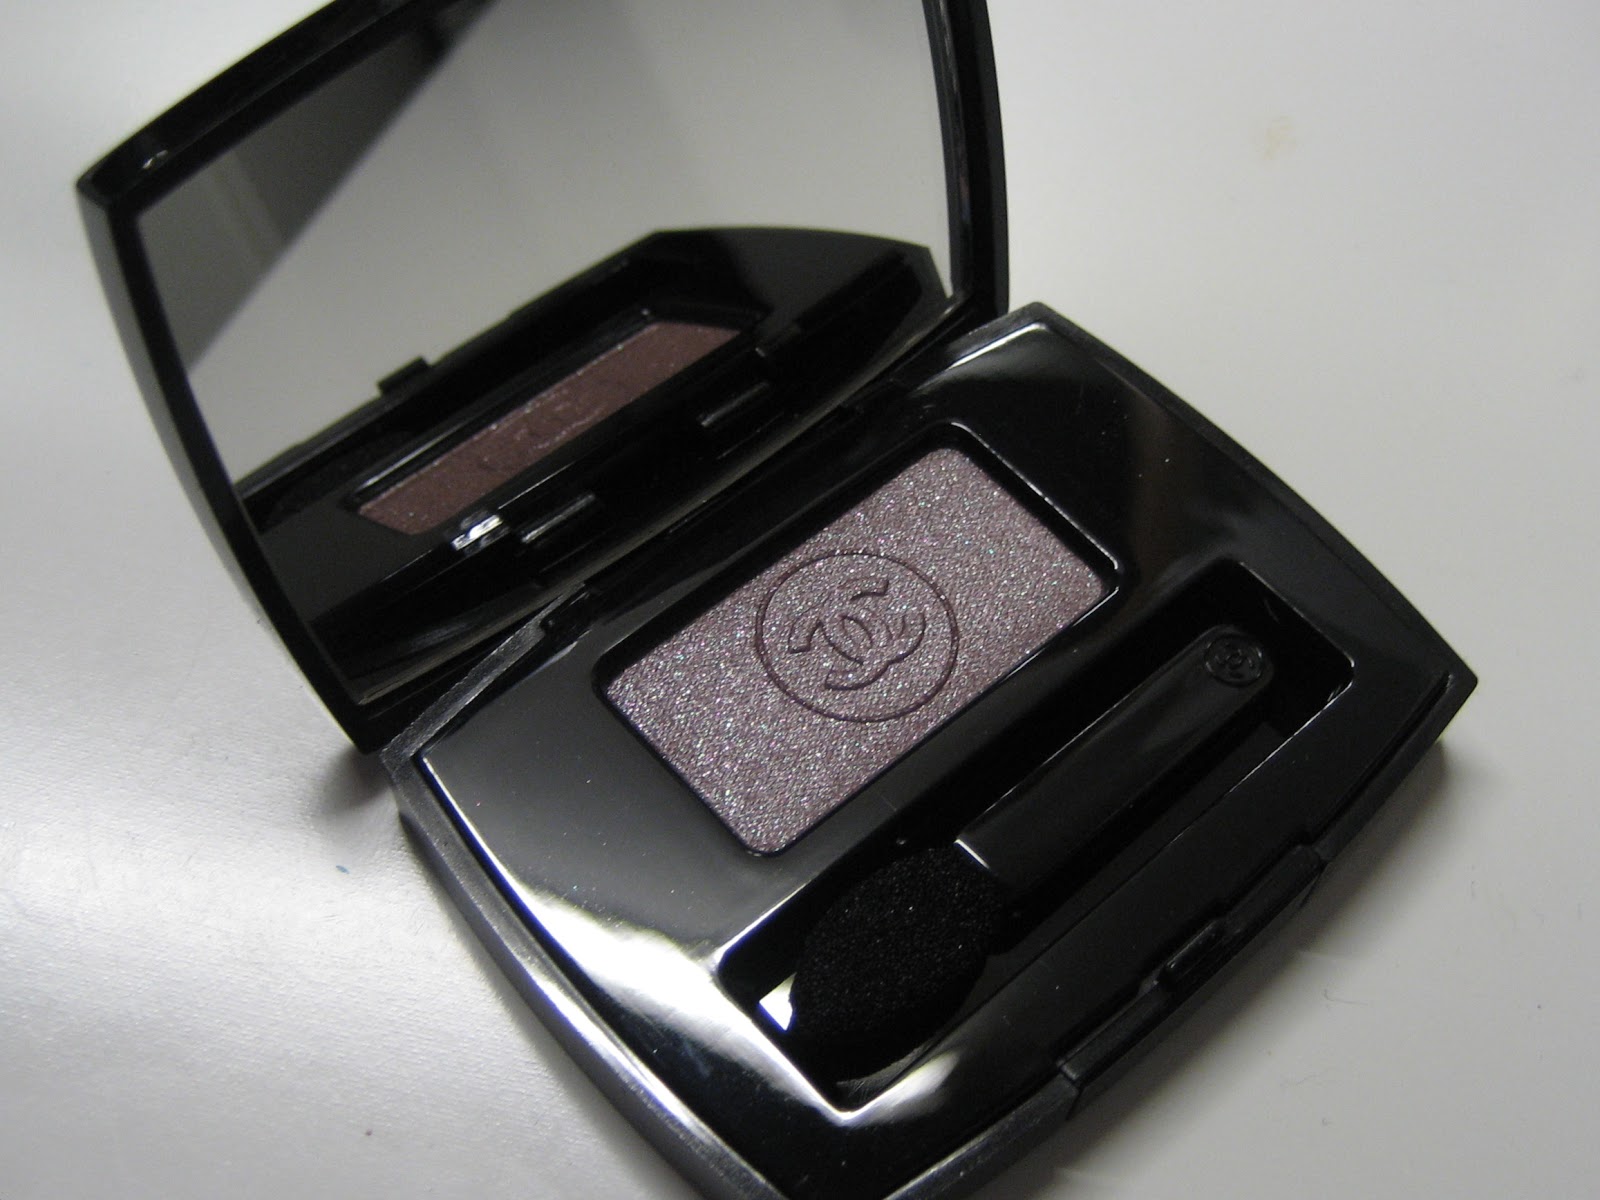 Chanel Fauve #90 Soft Touch Eyeshadow - The Beauty Look Book